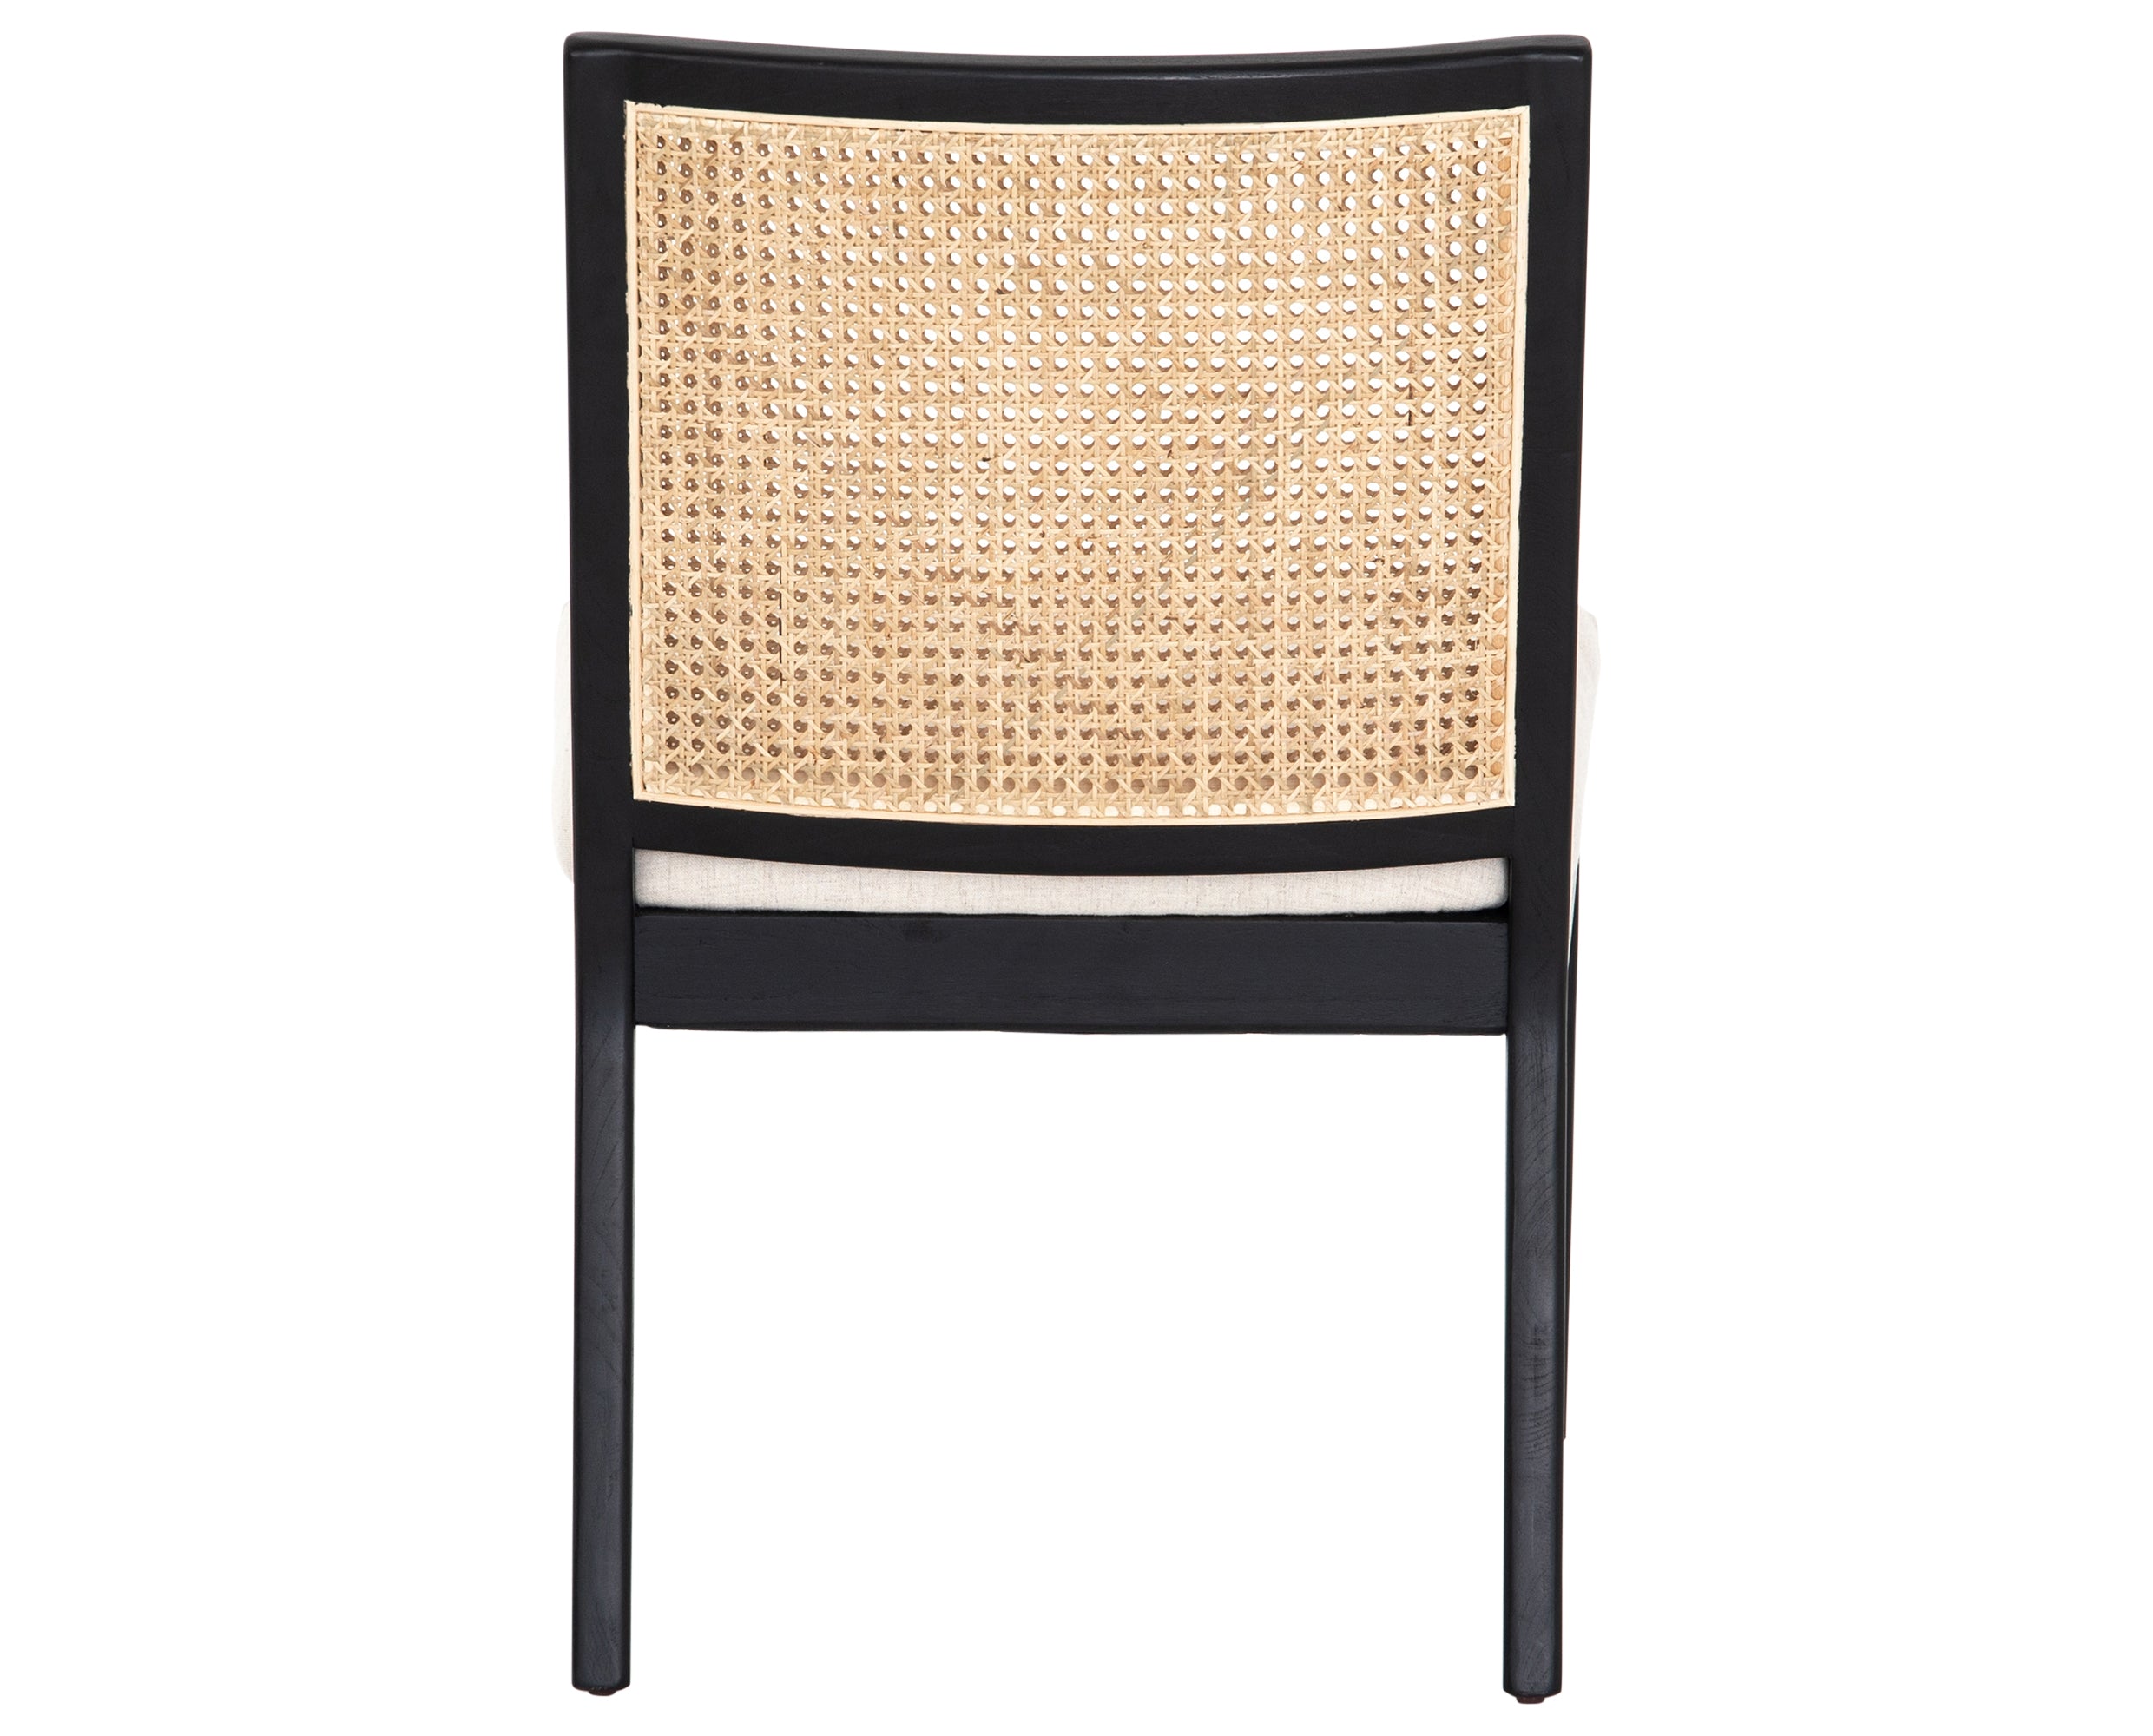 Savile Flax Fabric and Brushed Ebony Nettlewood with Light Natural Cane | Antonia Cane Armless Dining Chair | Valley Ridge Furniture